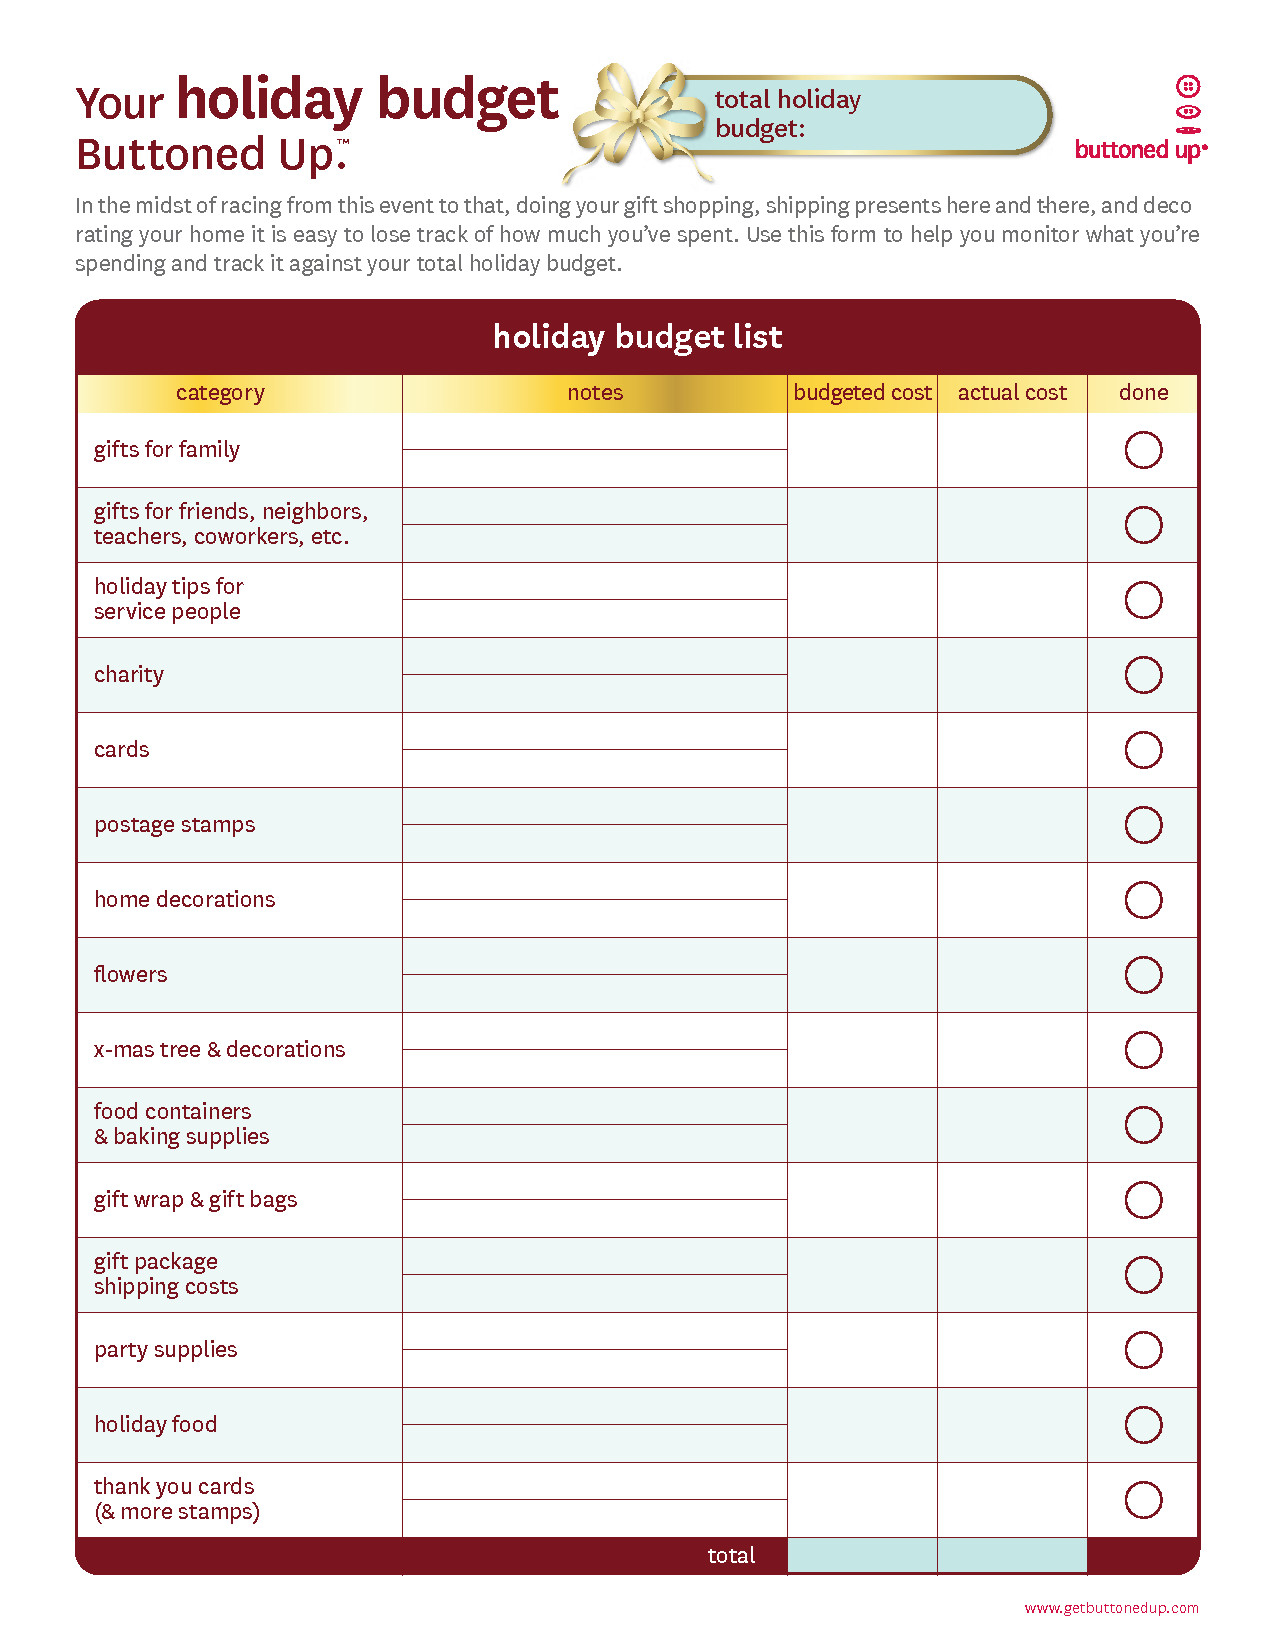 Sample Fundraising Templates Spreadsheet Excel Examples With Fundraising Report Template